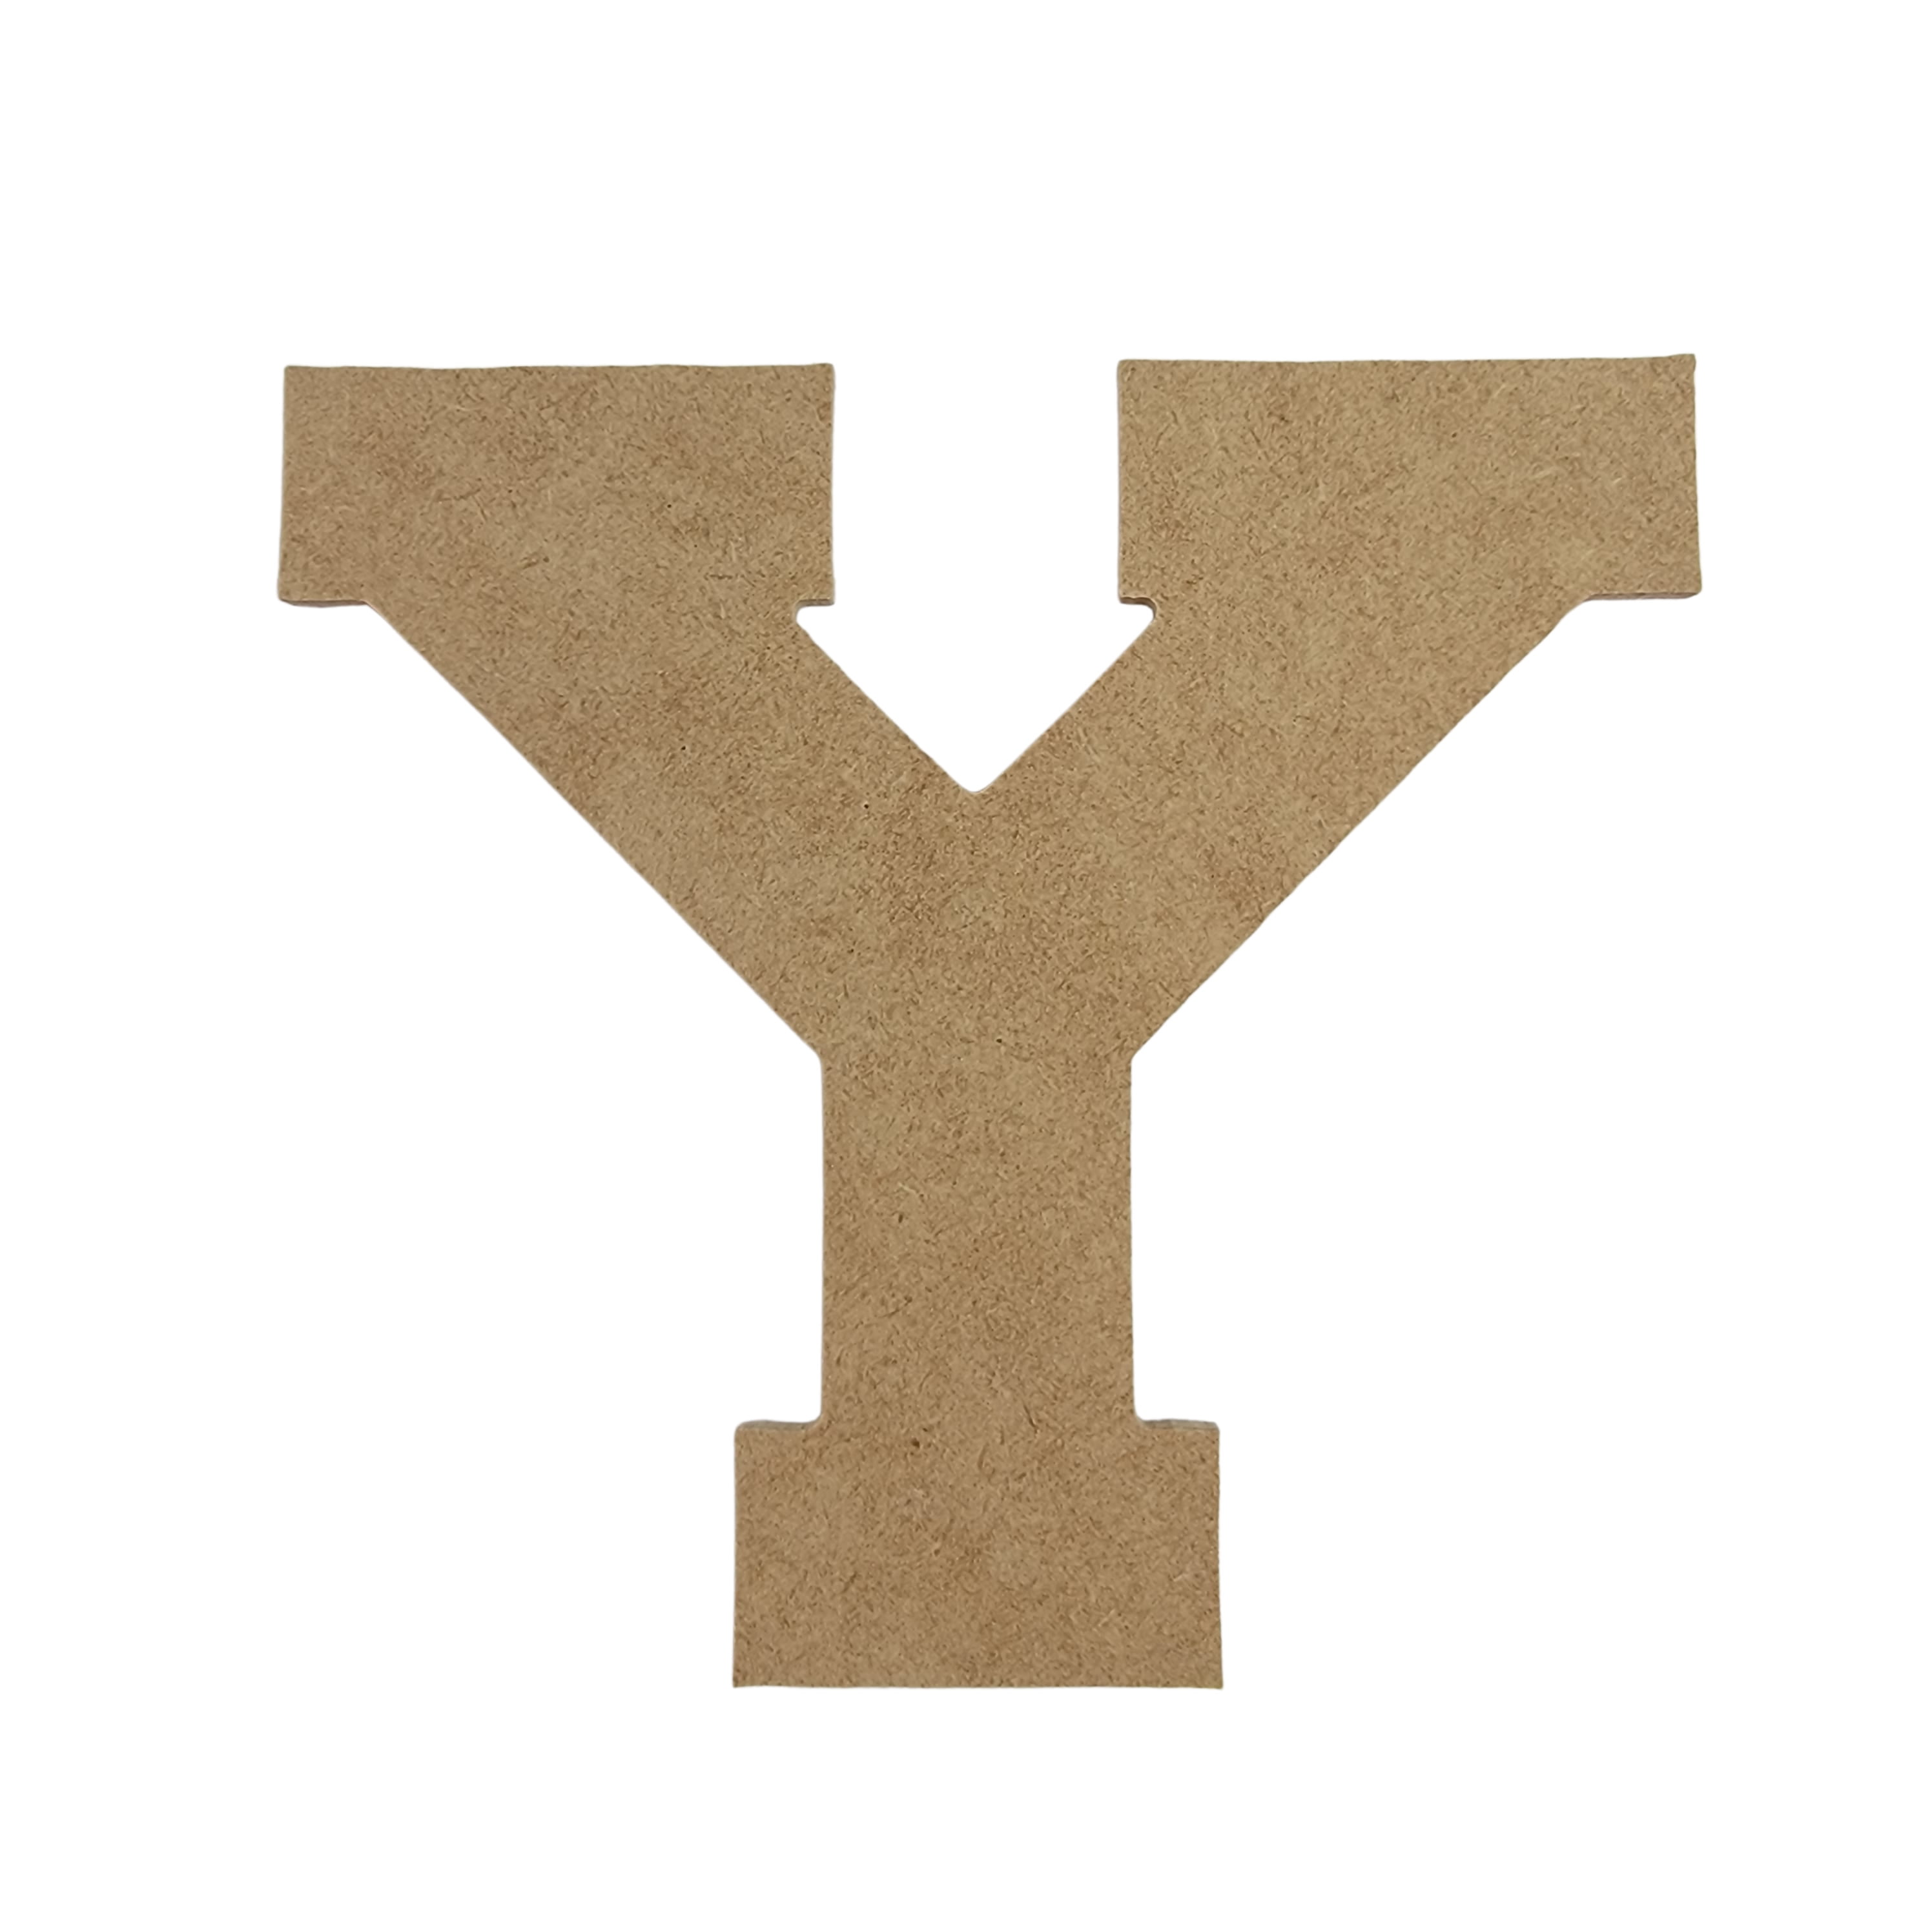 4 wooden letter y unfinished collegiate font craft cutout 1 8 thick walmart com